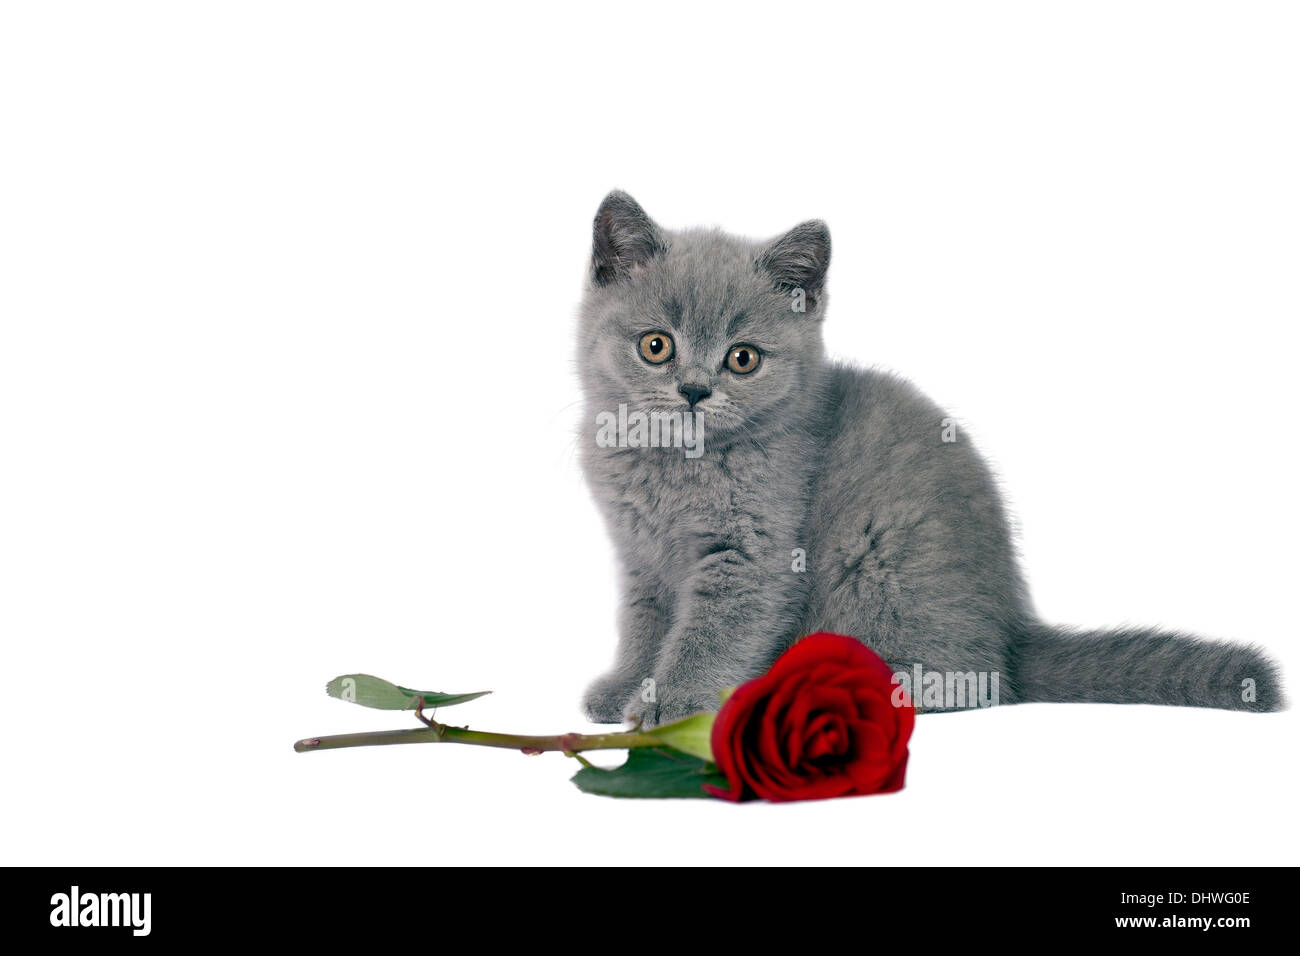 British Shorthair kitten with a red rose. Stock Photo